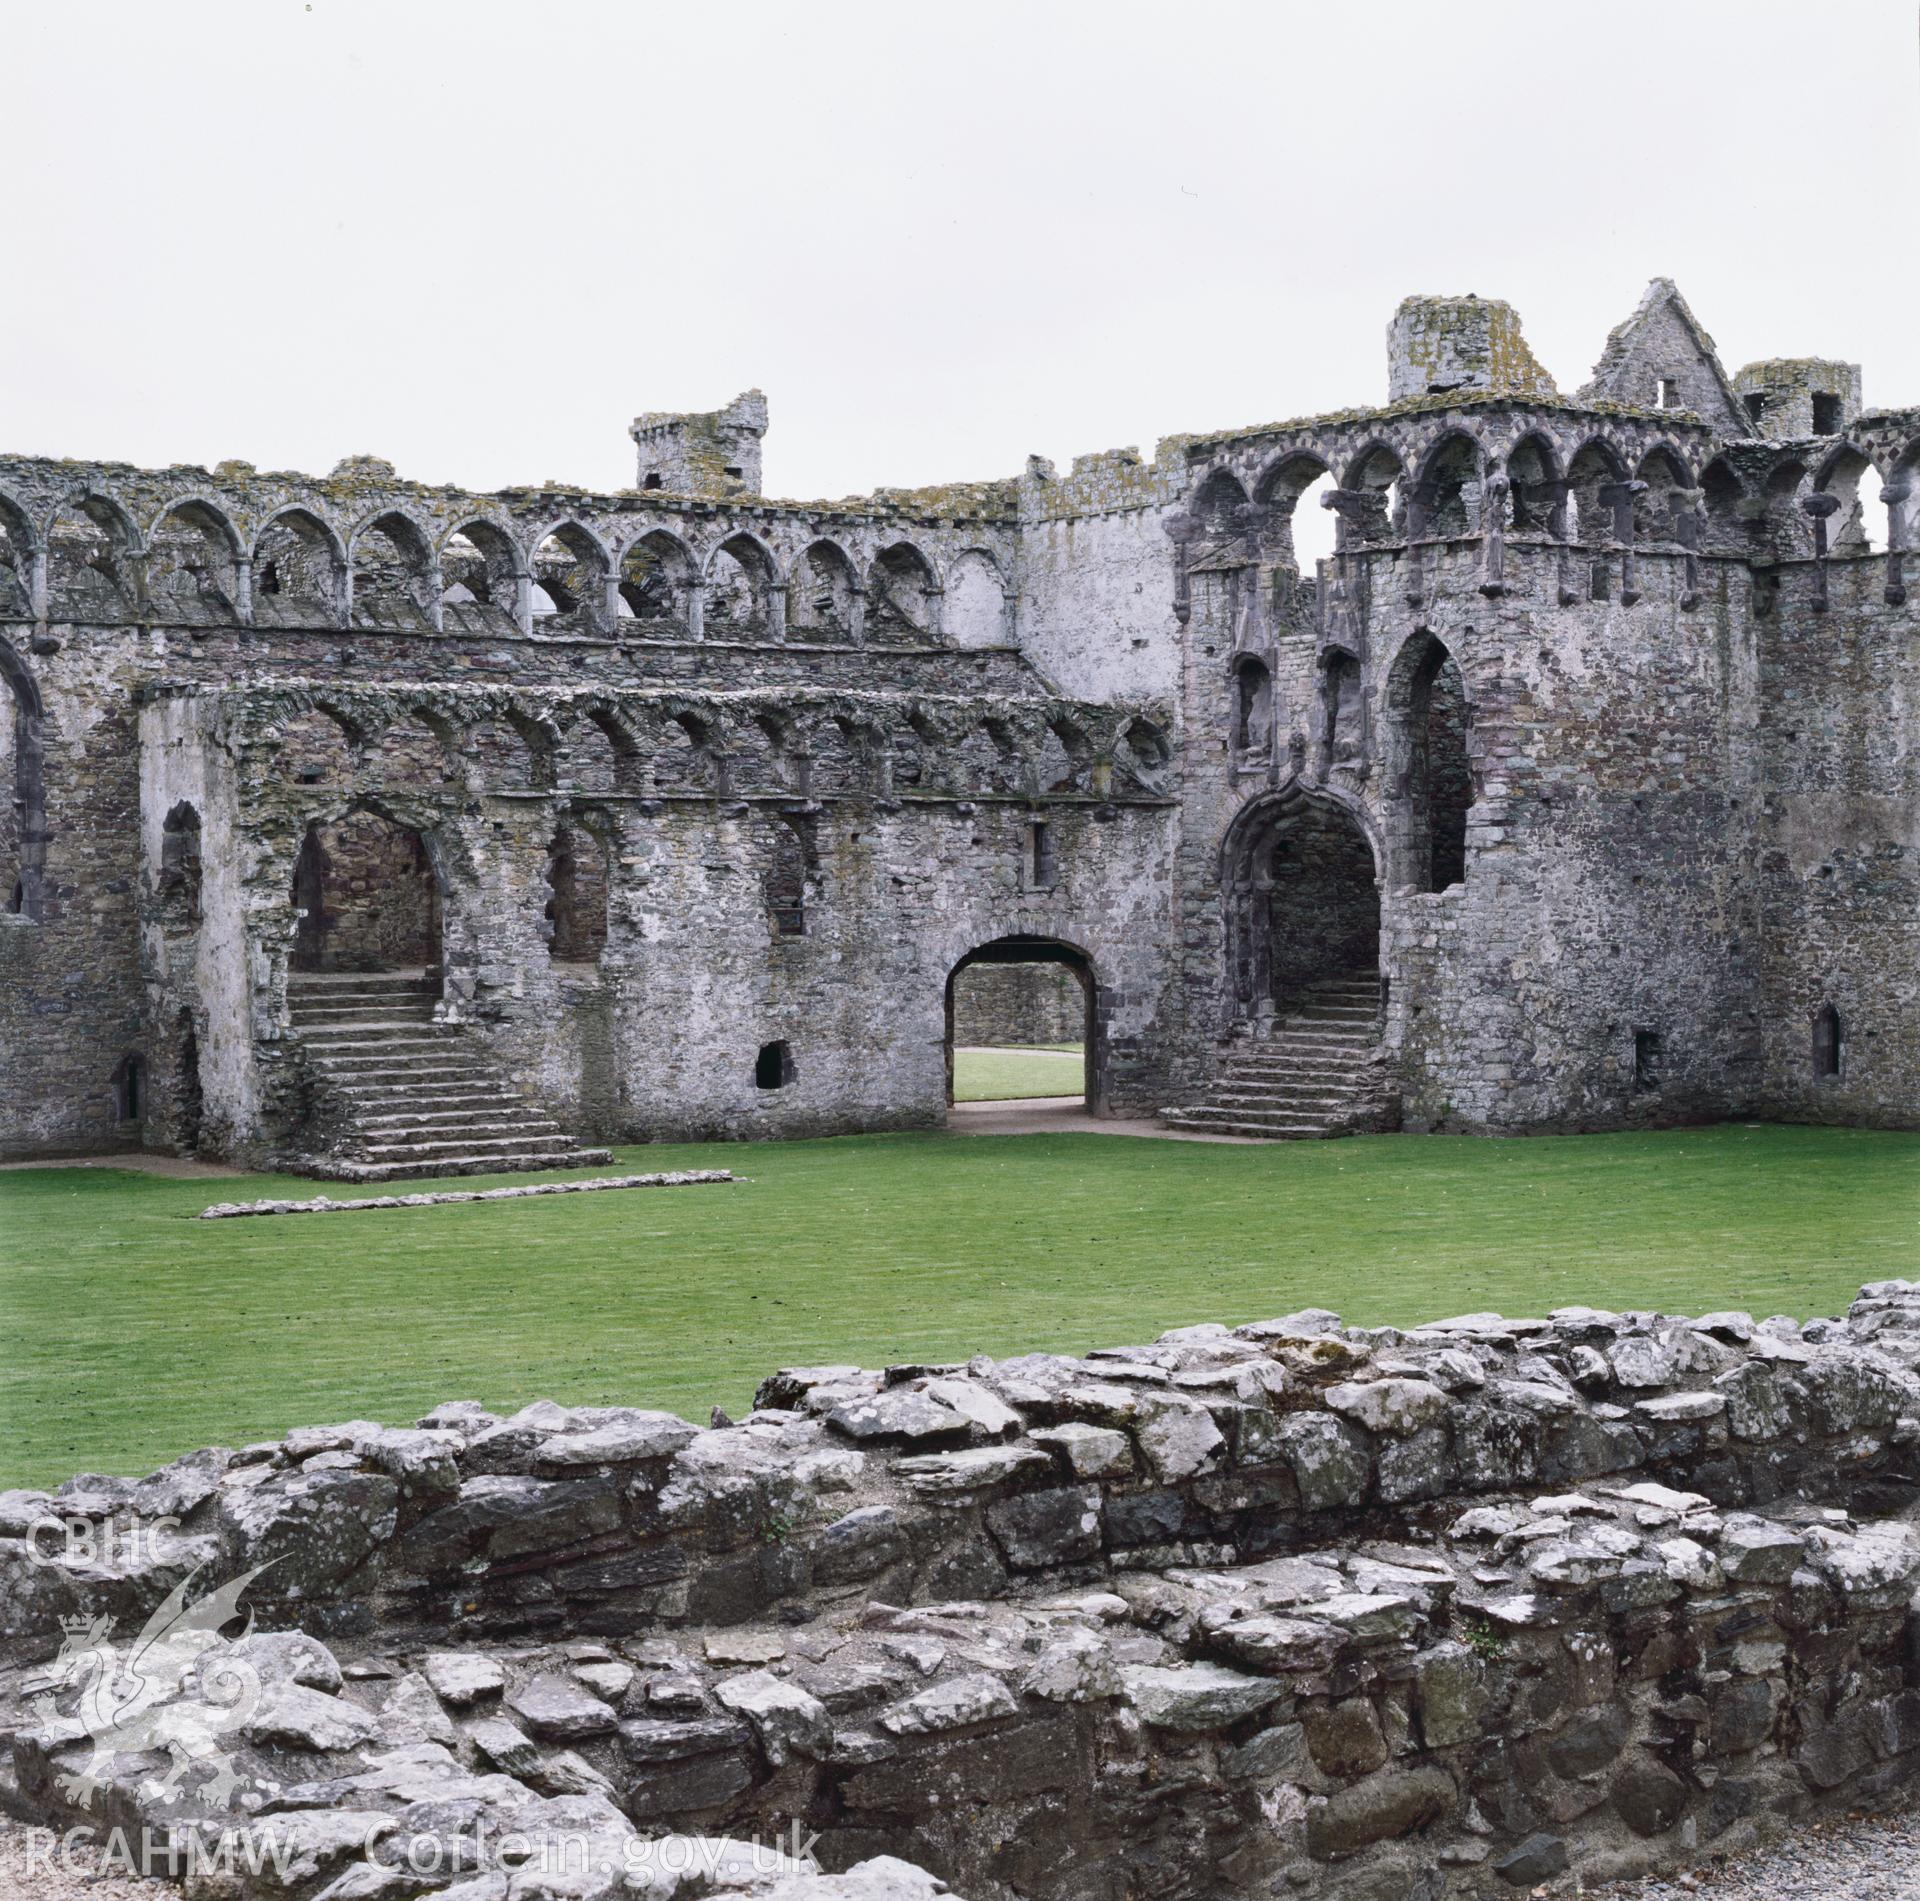 RCAHMW colour transparency showing  view of Bishops Palace, St Davids.